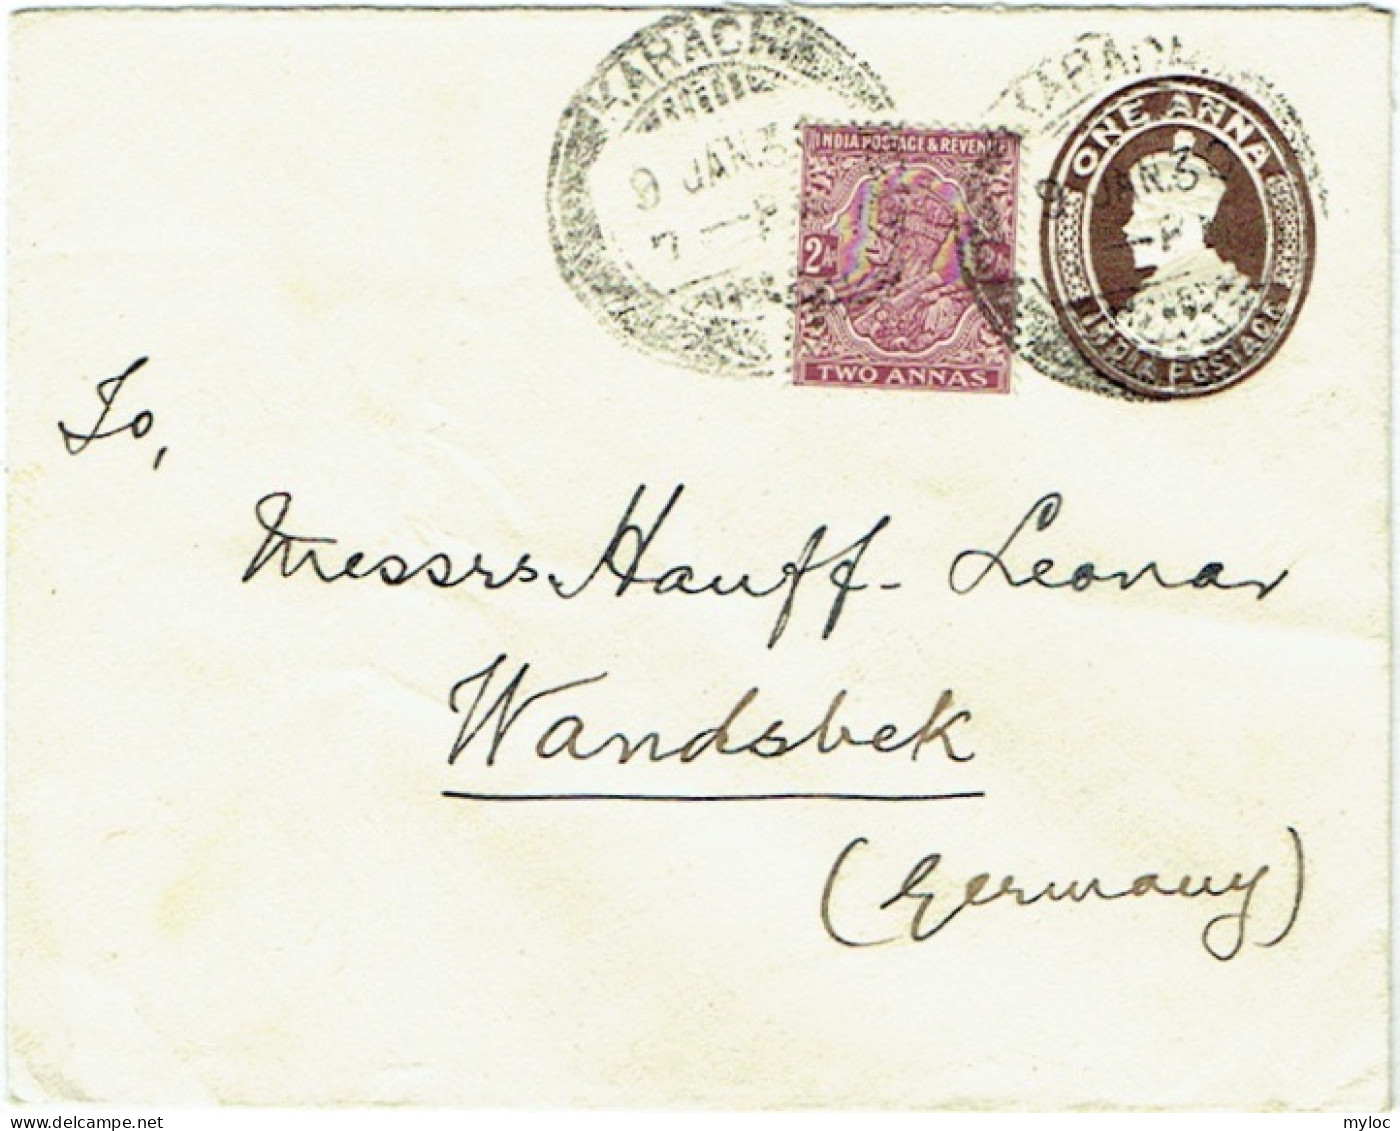 Enveloppe One Anna India Postage Avec Timbre Two Annas. Karachi To Wandsbek (Germany). - Covers